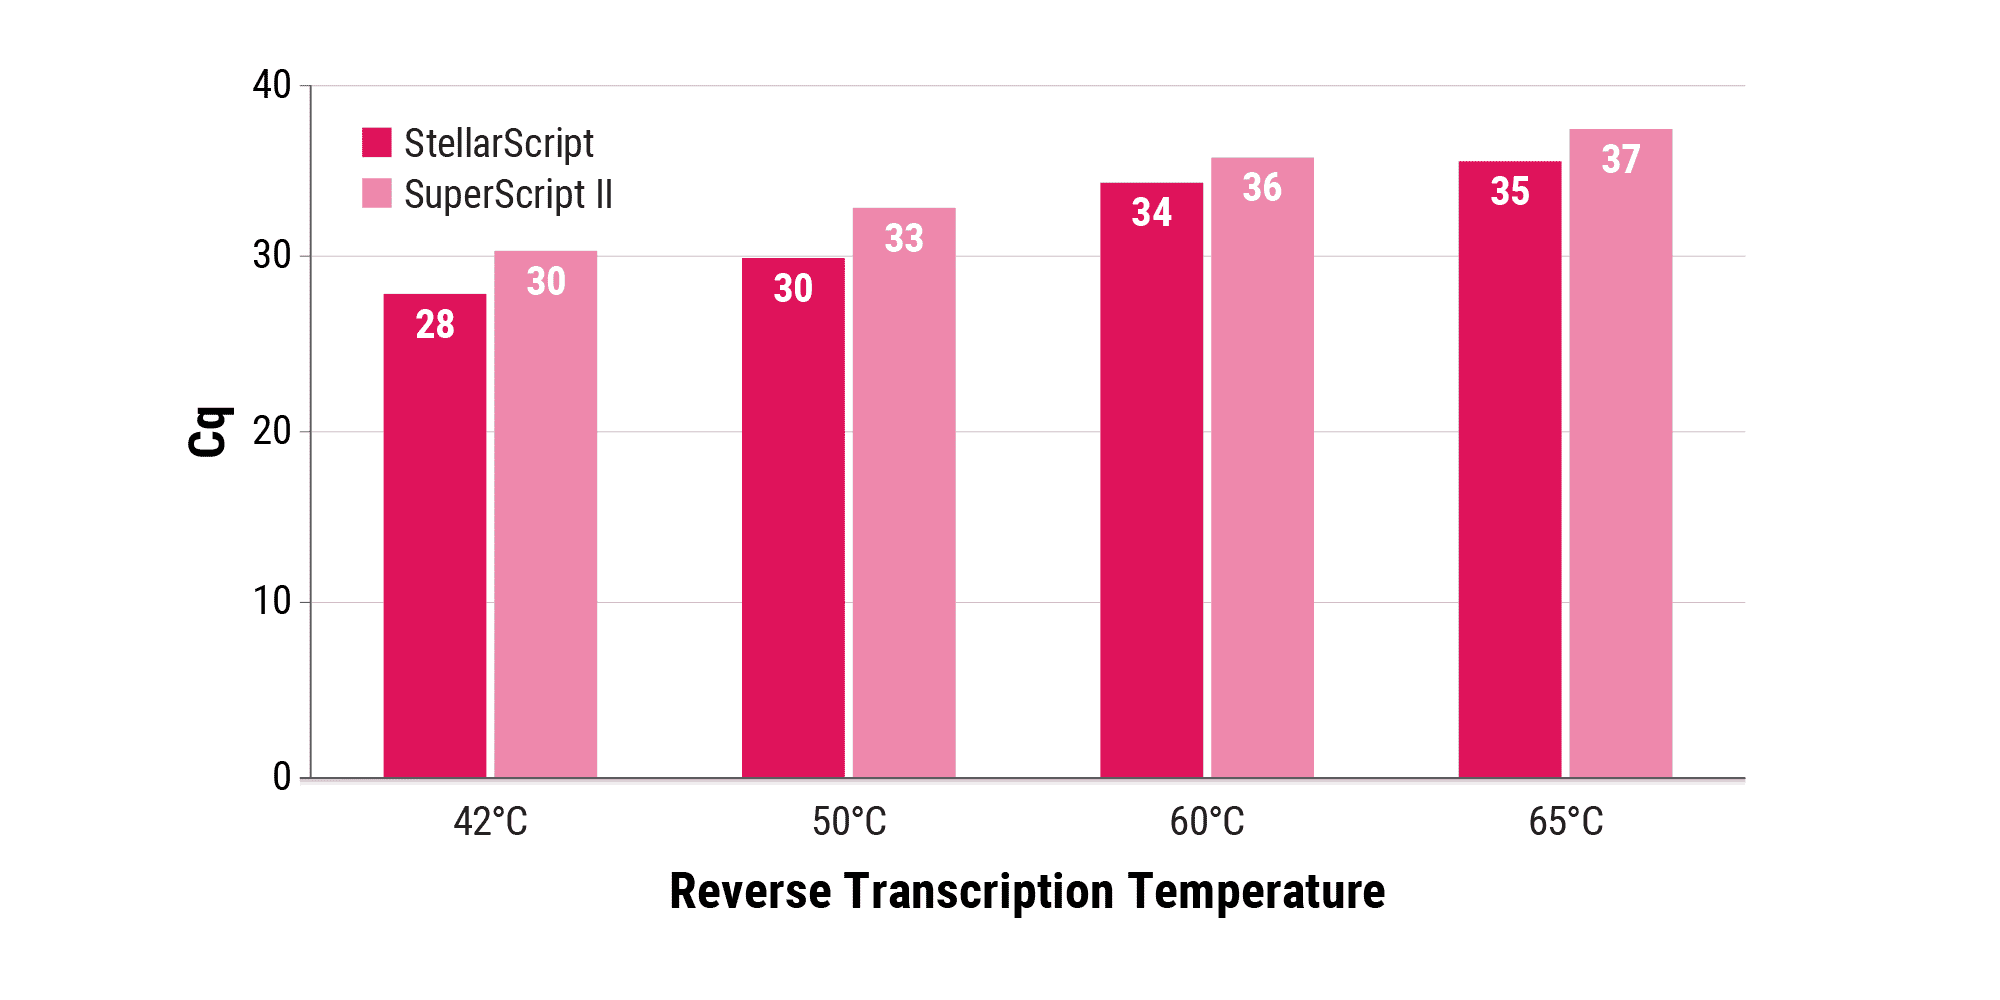 Figure 2B. Improved performance at elevated temperatures. Watchmaker’s StellarScript and ThermoFisher Scientific’s SuperScript II were run in oligo-dT-primed first strand synthesis at 42°C, 50°C, 60°C or 65°C for 25 minutes using 10 ng total liver RNA as template. Resulting cDNA mass was assessed via qPCR. StellarScript produced higher yields (indicated by lower Cq values) at any evaluated temperature than SuperScript II.